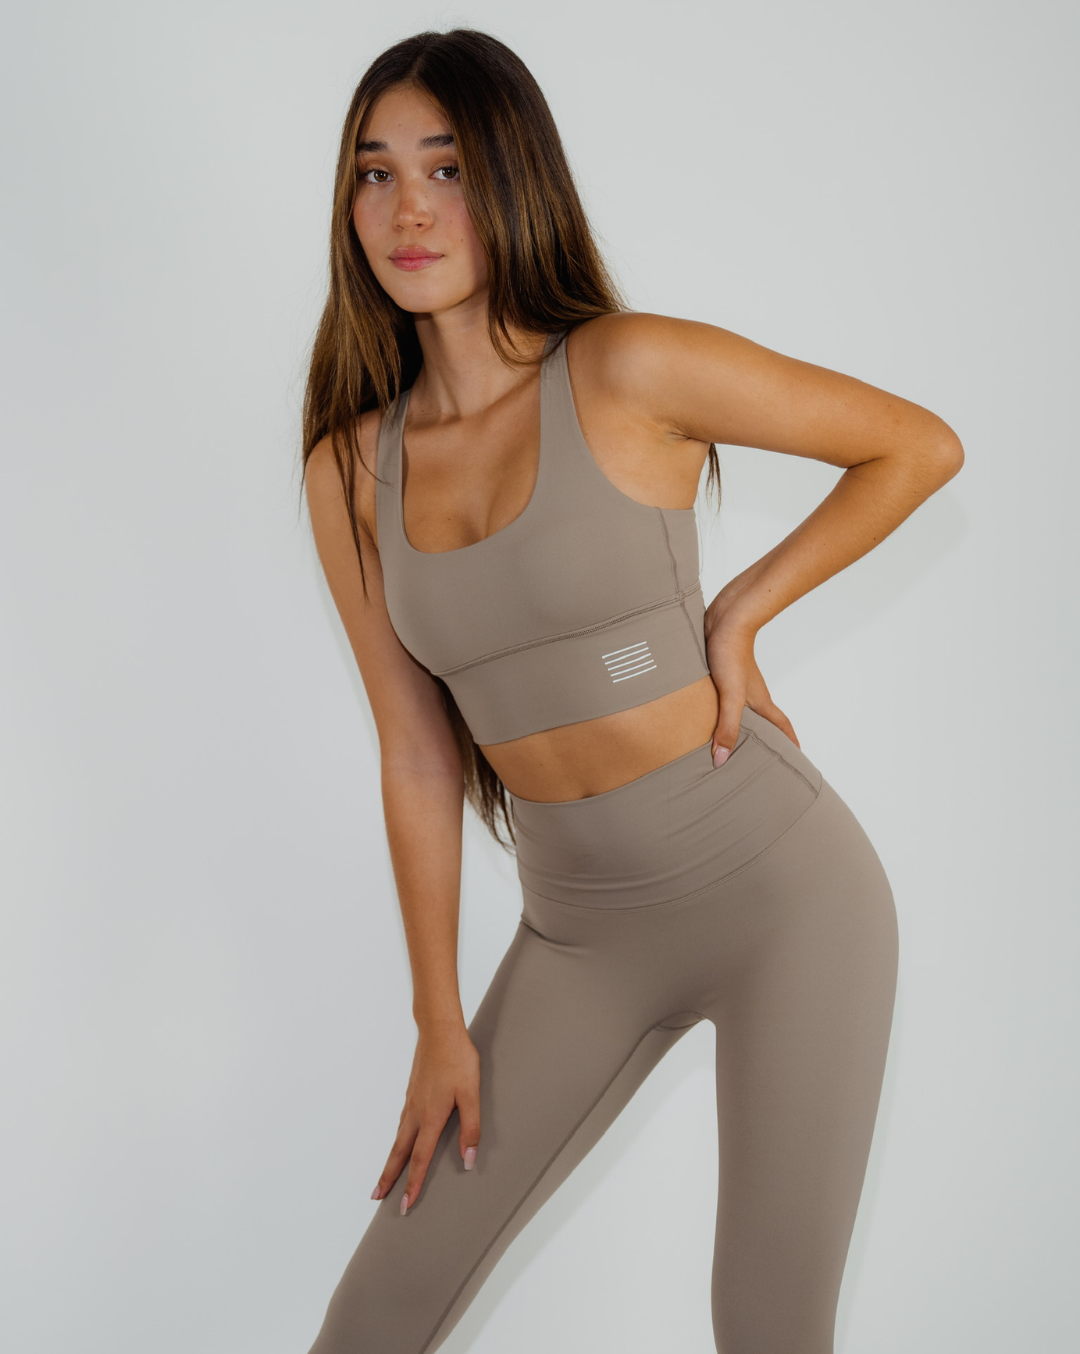 beige yoga outfit